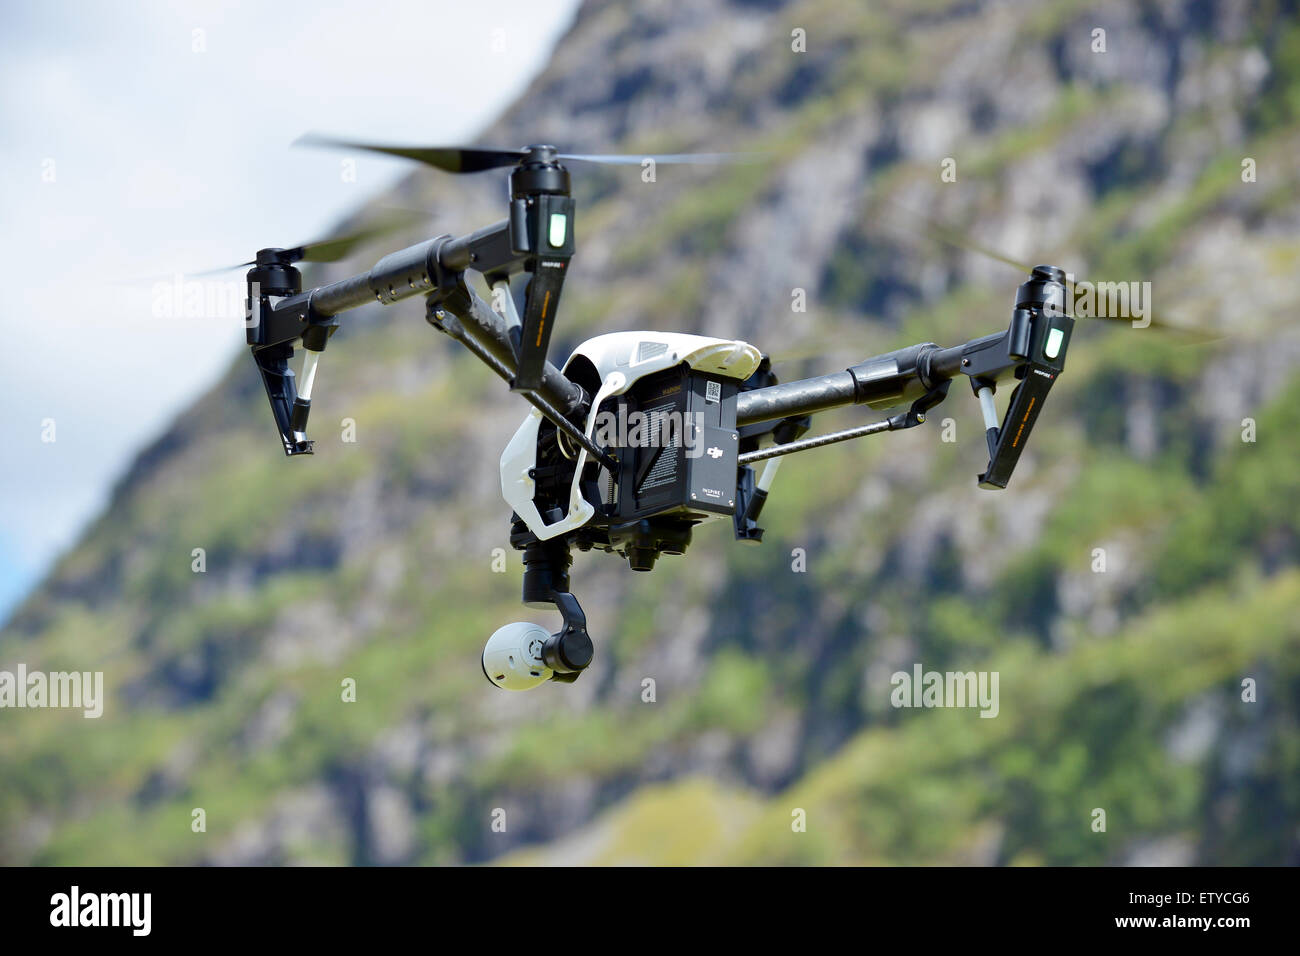 Drone with camera flying Stock Photo